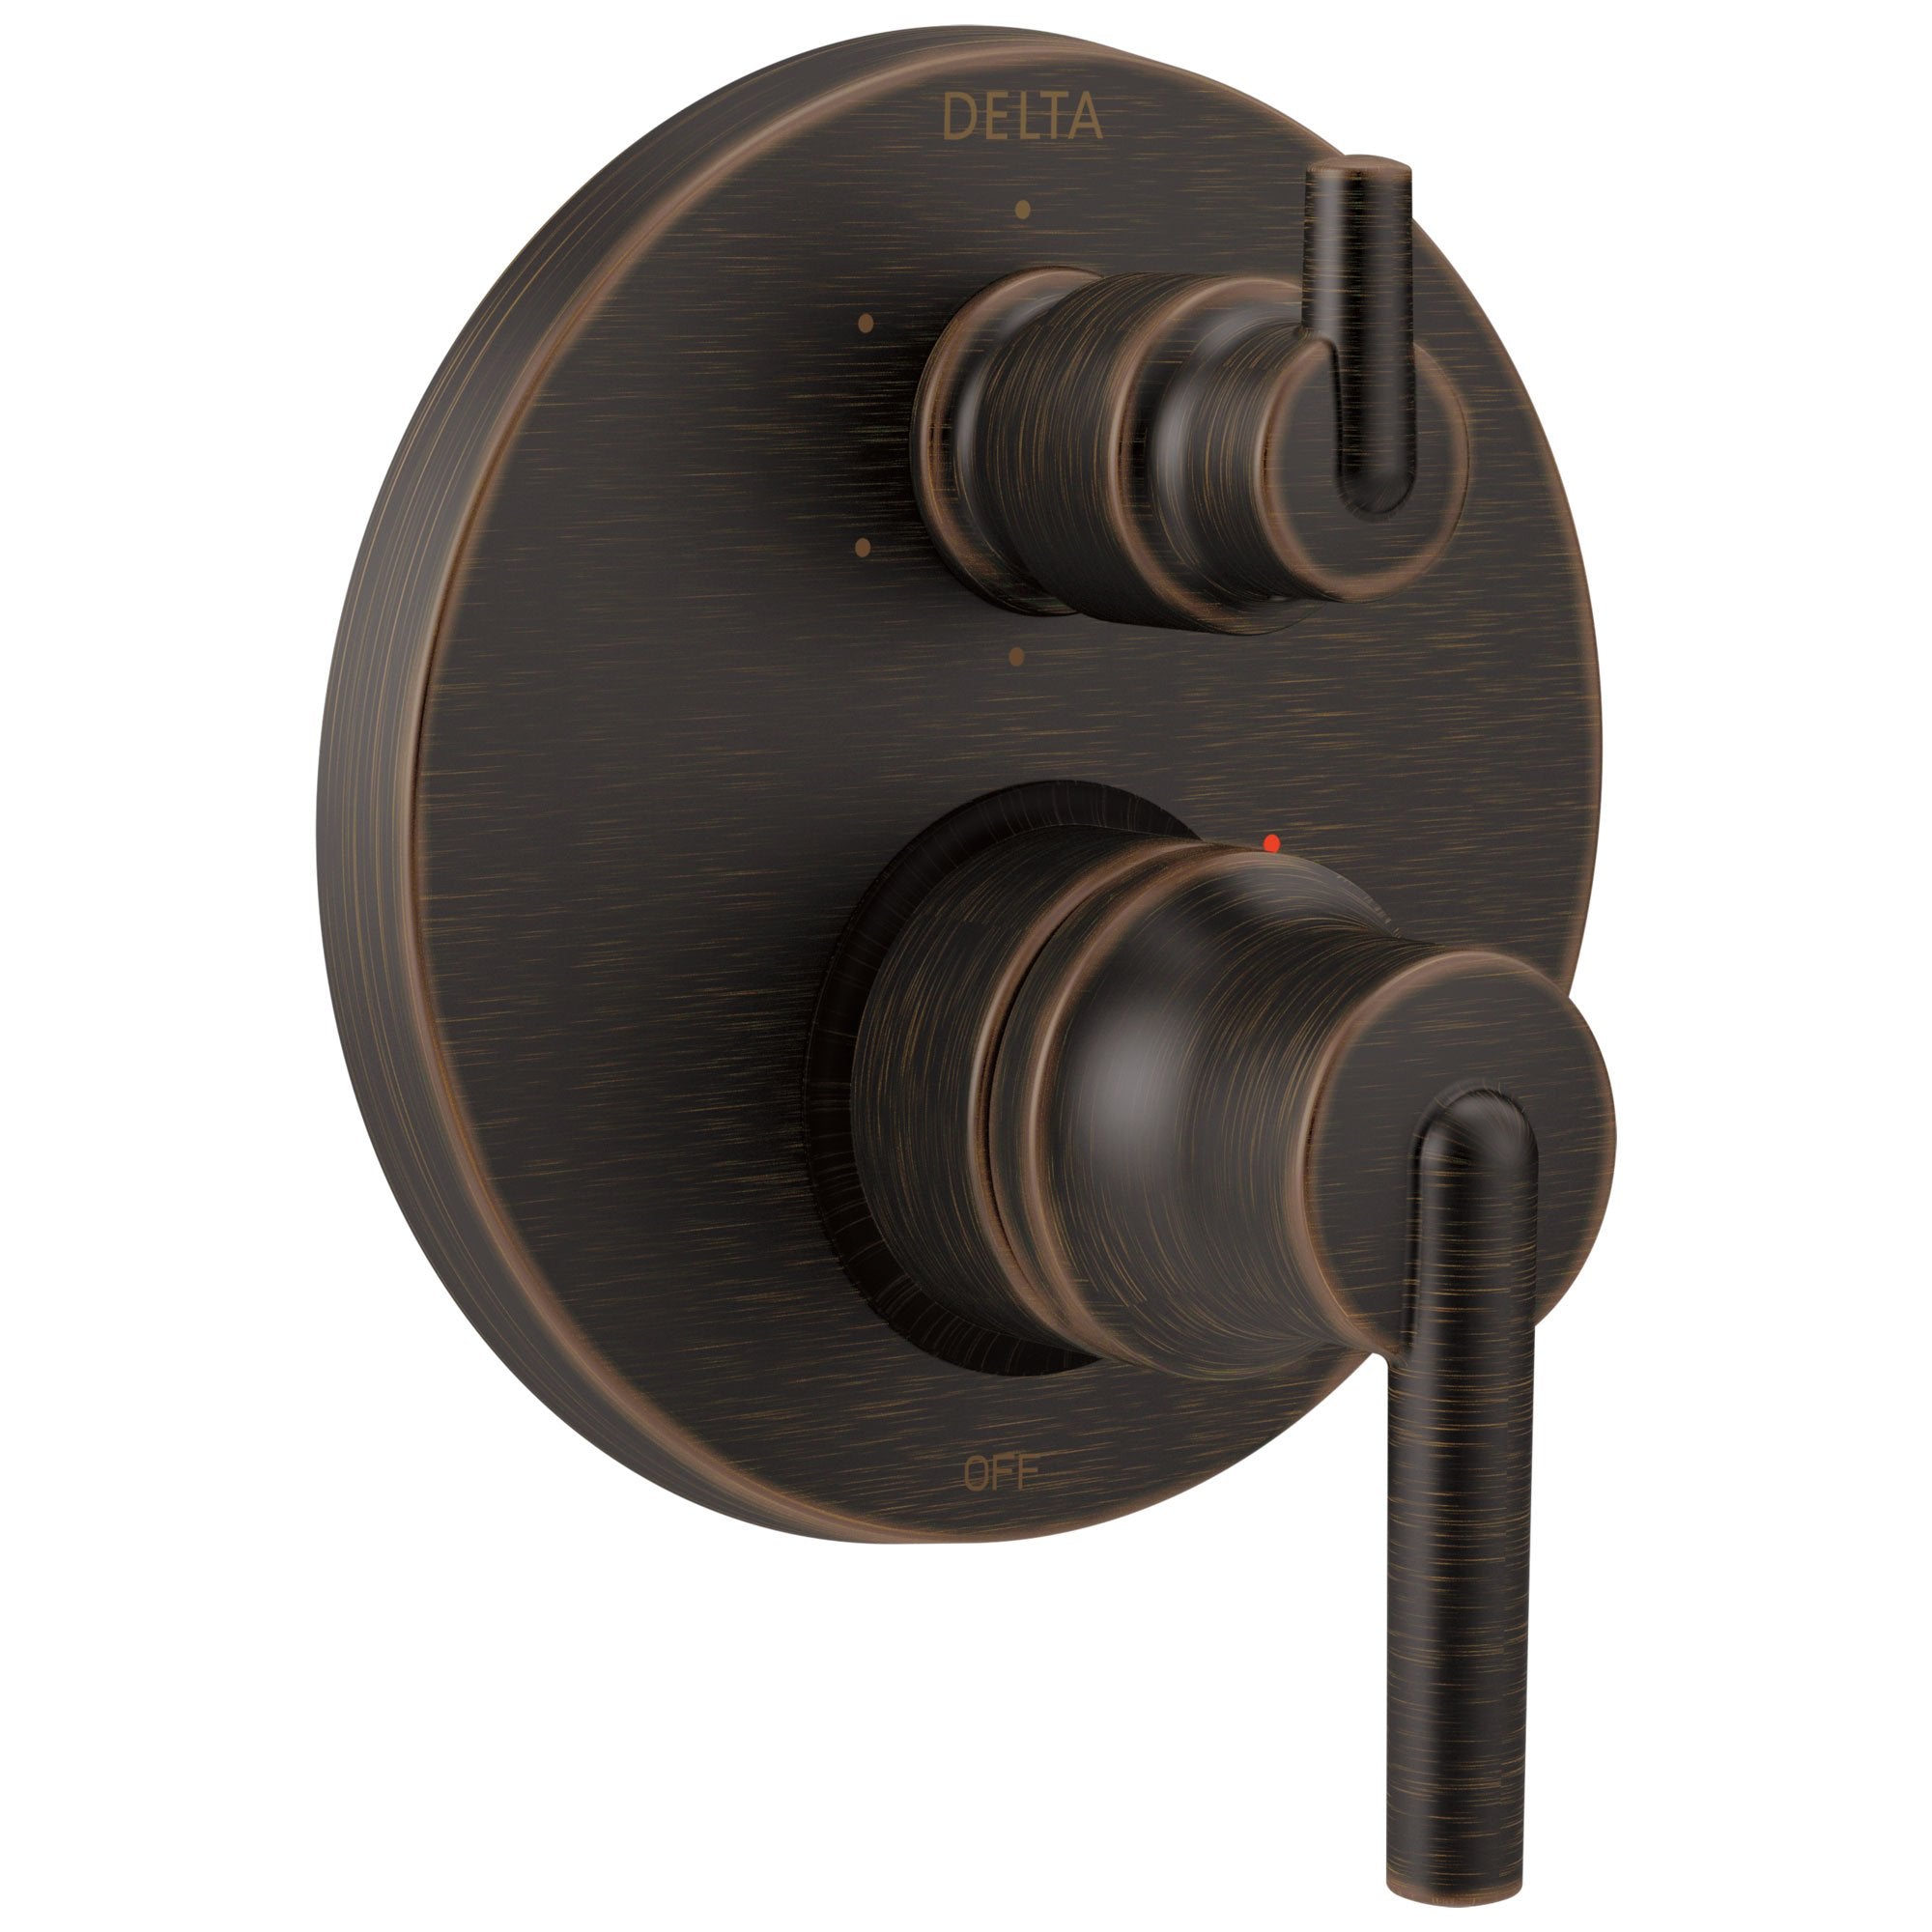 Delta Trinsic Venetian Bronze Monitor 14 Shower Faucet Control Handle with 6-Setting Integrated Diverter Includes Trim Kit and Valve without Stops D2198V